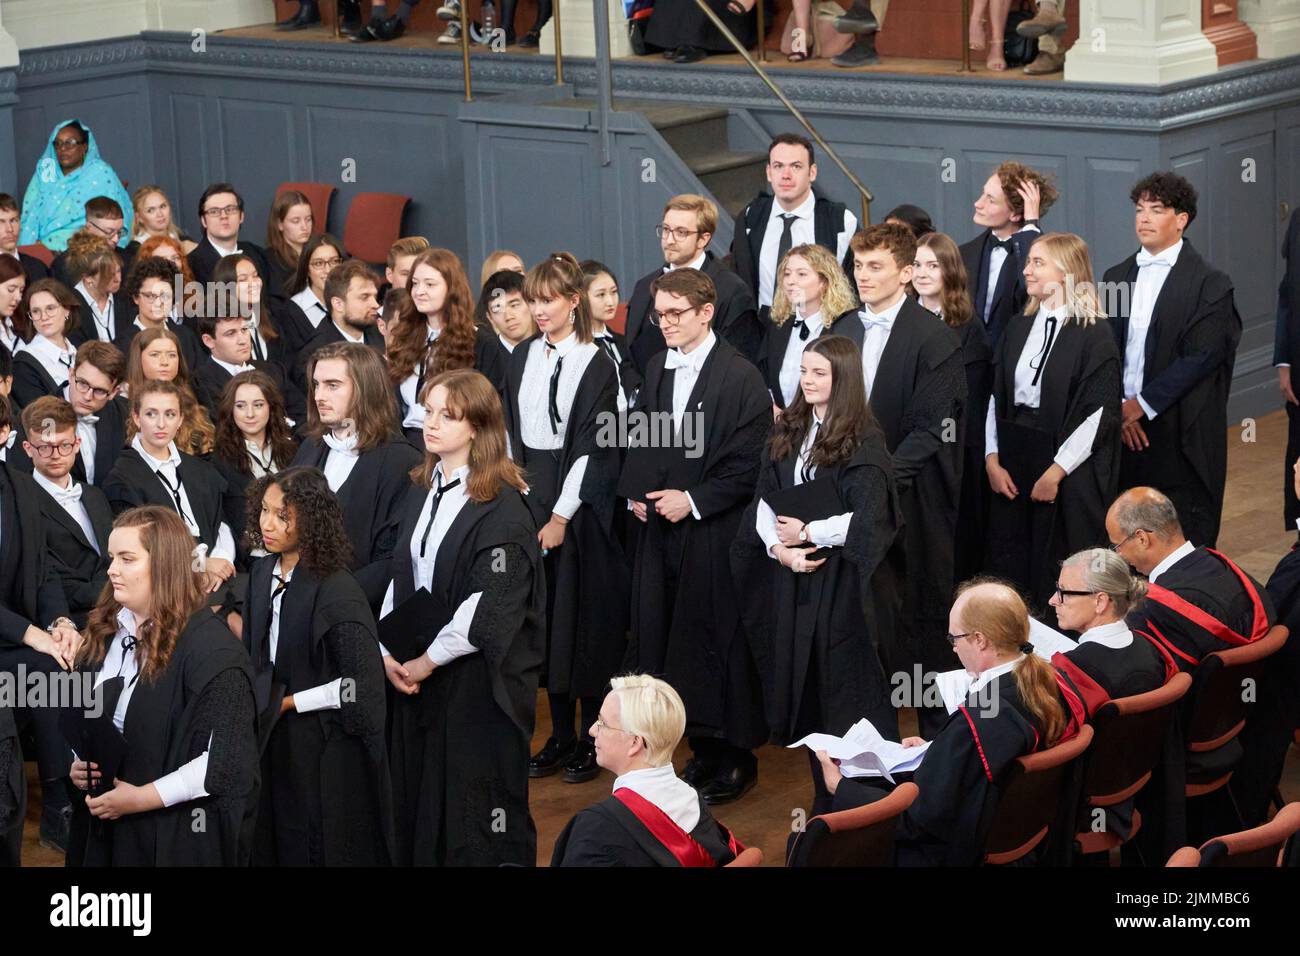 Oxford University graduation ceremony in the Sheldonian Theatre, August